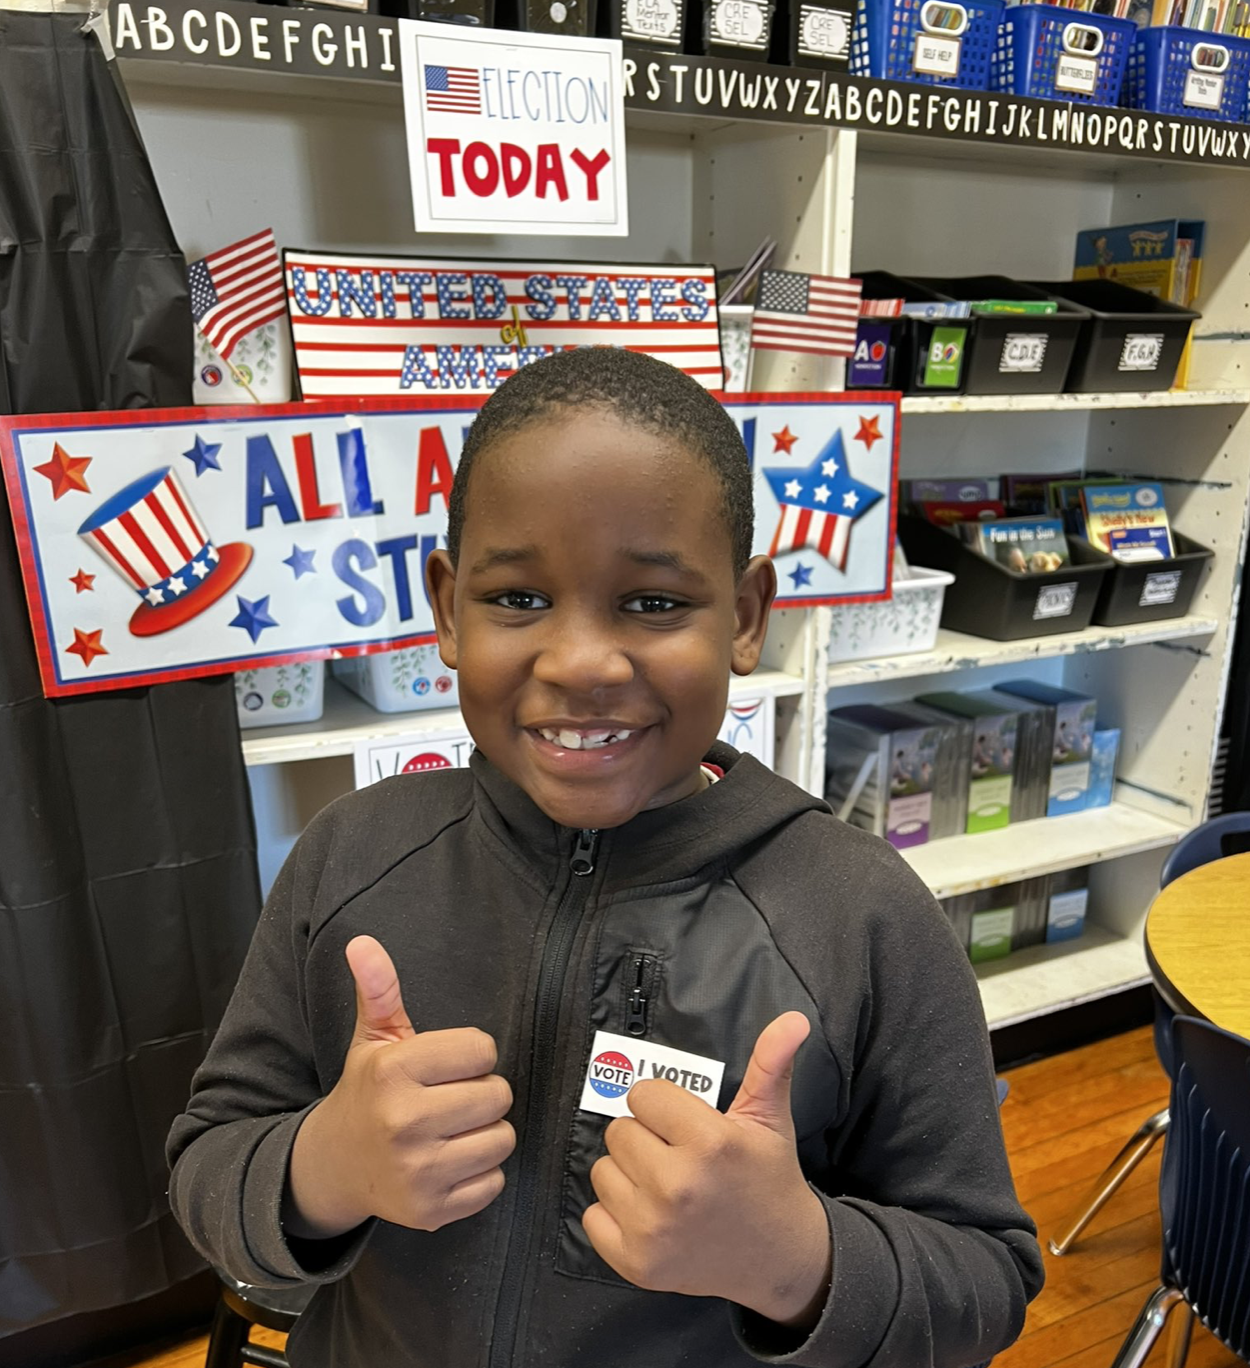 Photo of the week:  We saw this young voter cast his ballot for chocolate chip cookies over Oreos in Mrs. White's class.